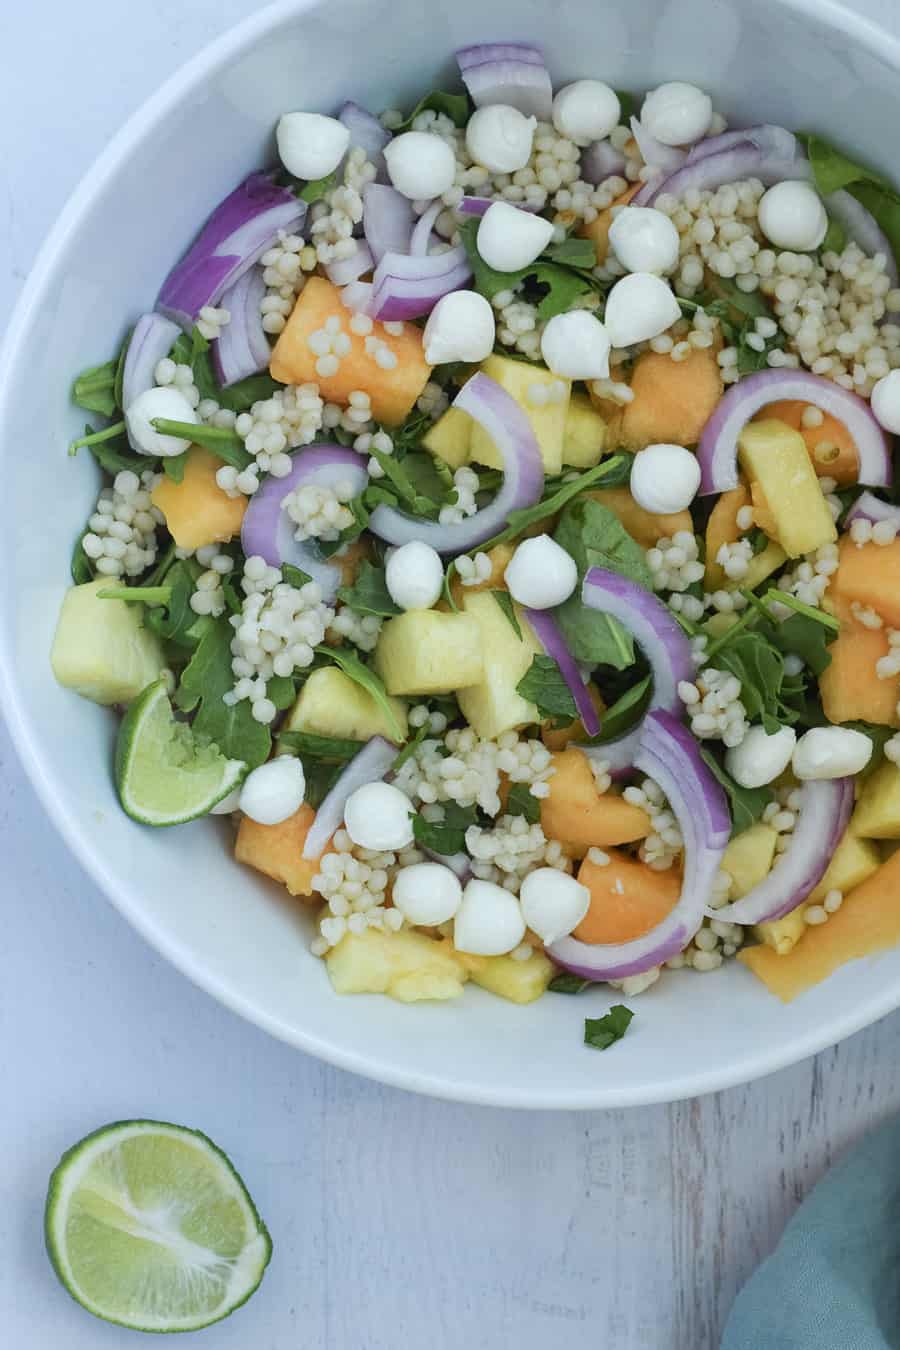 Pineapple salad recipe with mozzaralla, red onion and cous cous